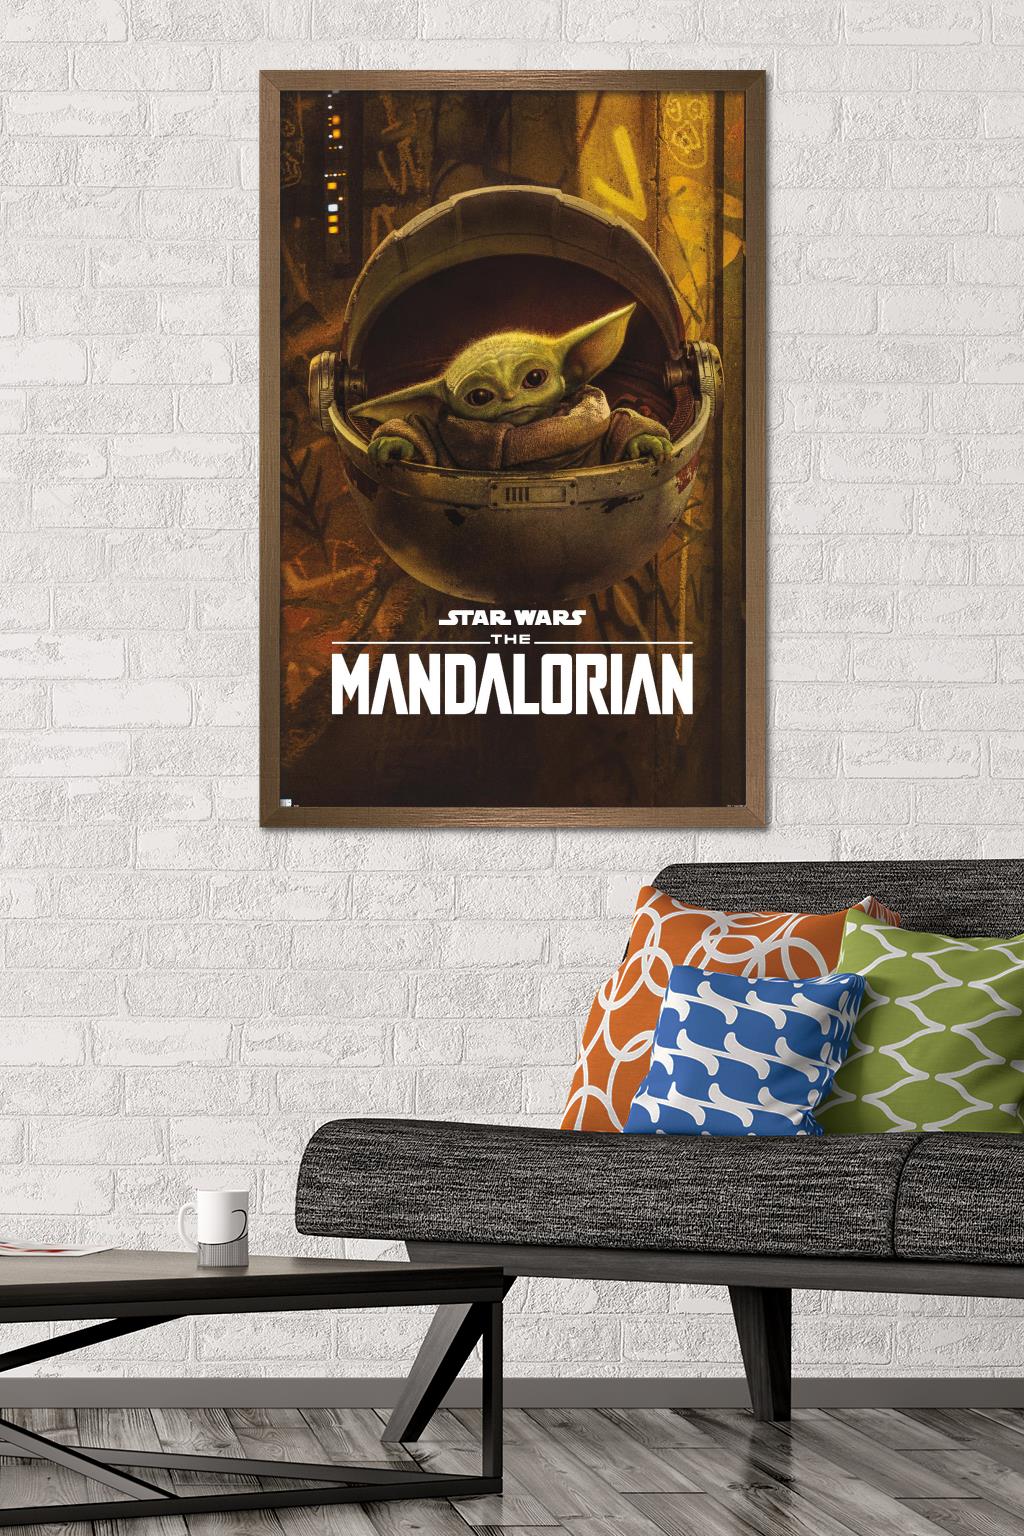 Star Wars: The Mandalorian Season 2 - The Child Wall Poster, 22.375" x 34", Framed - image 2 of 5